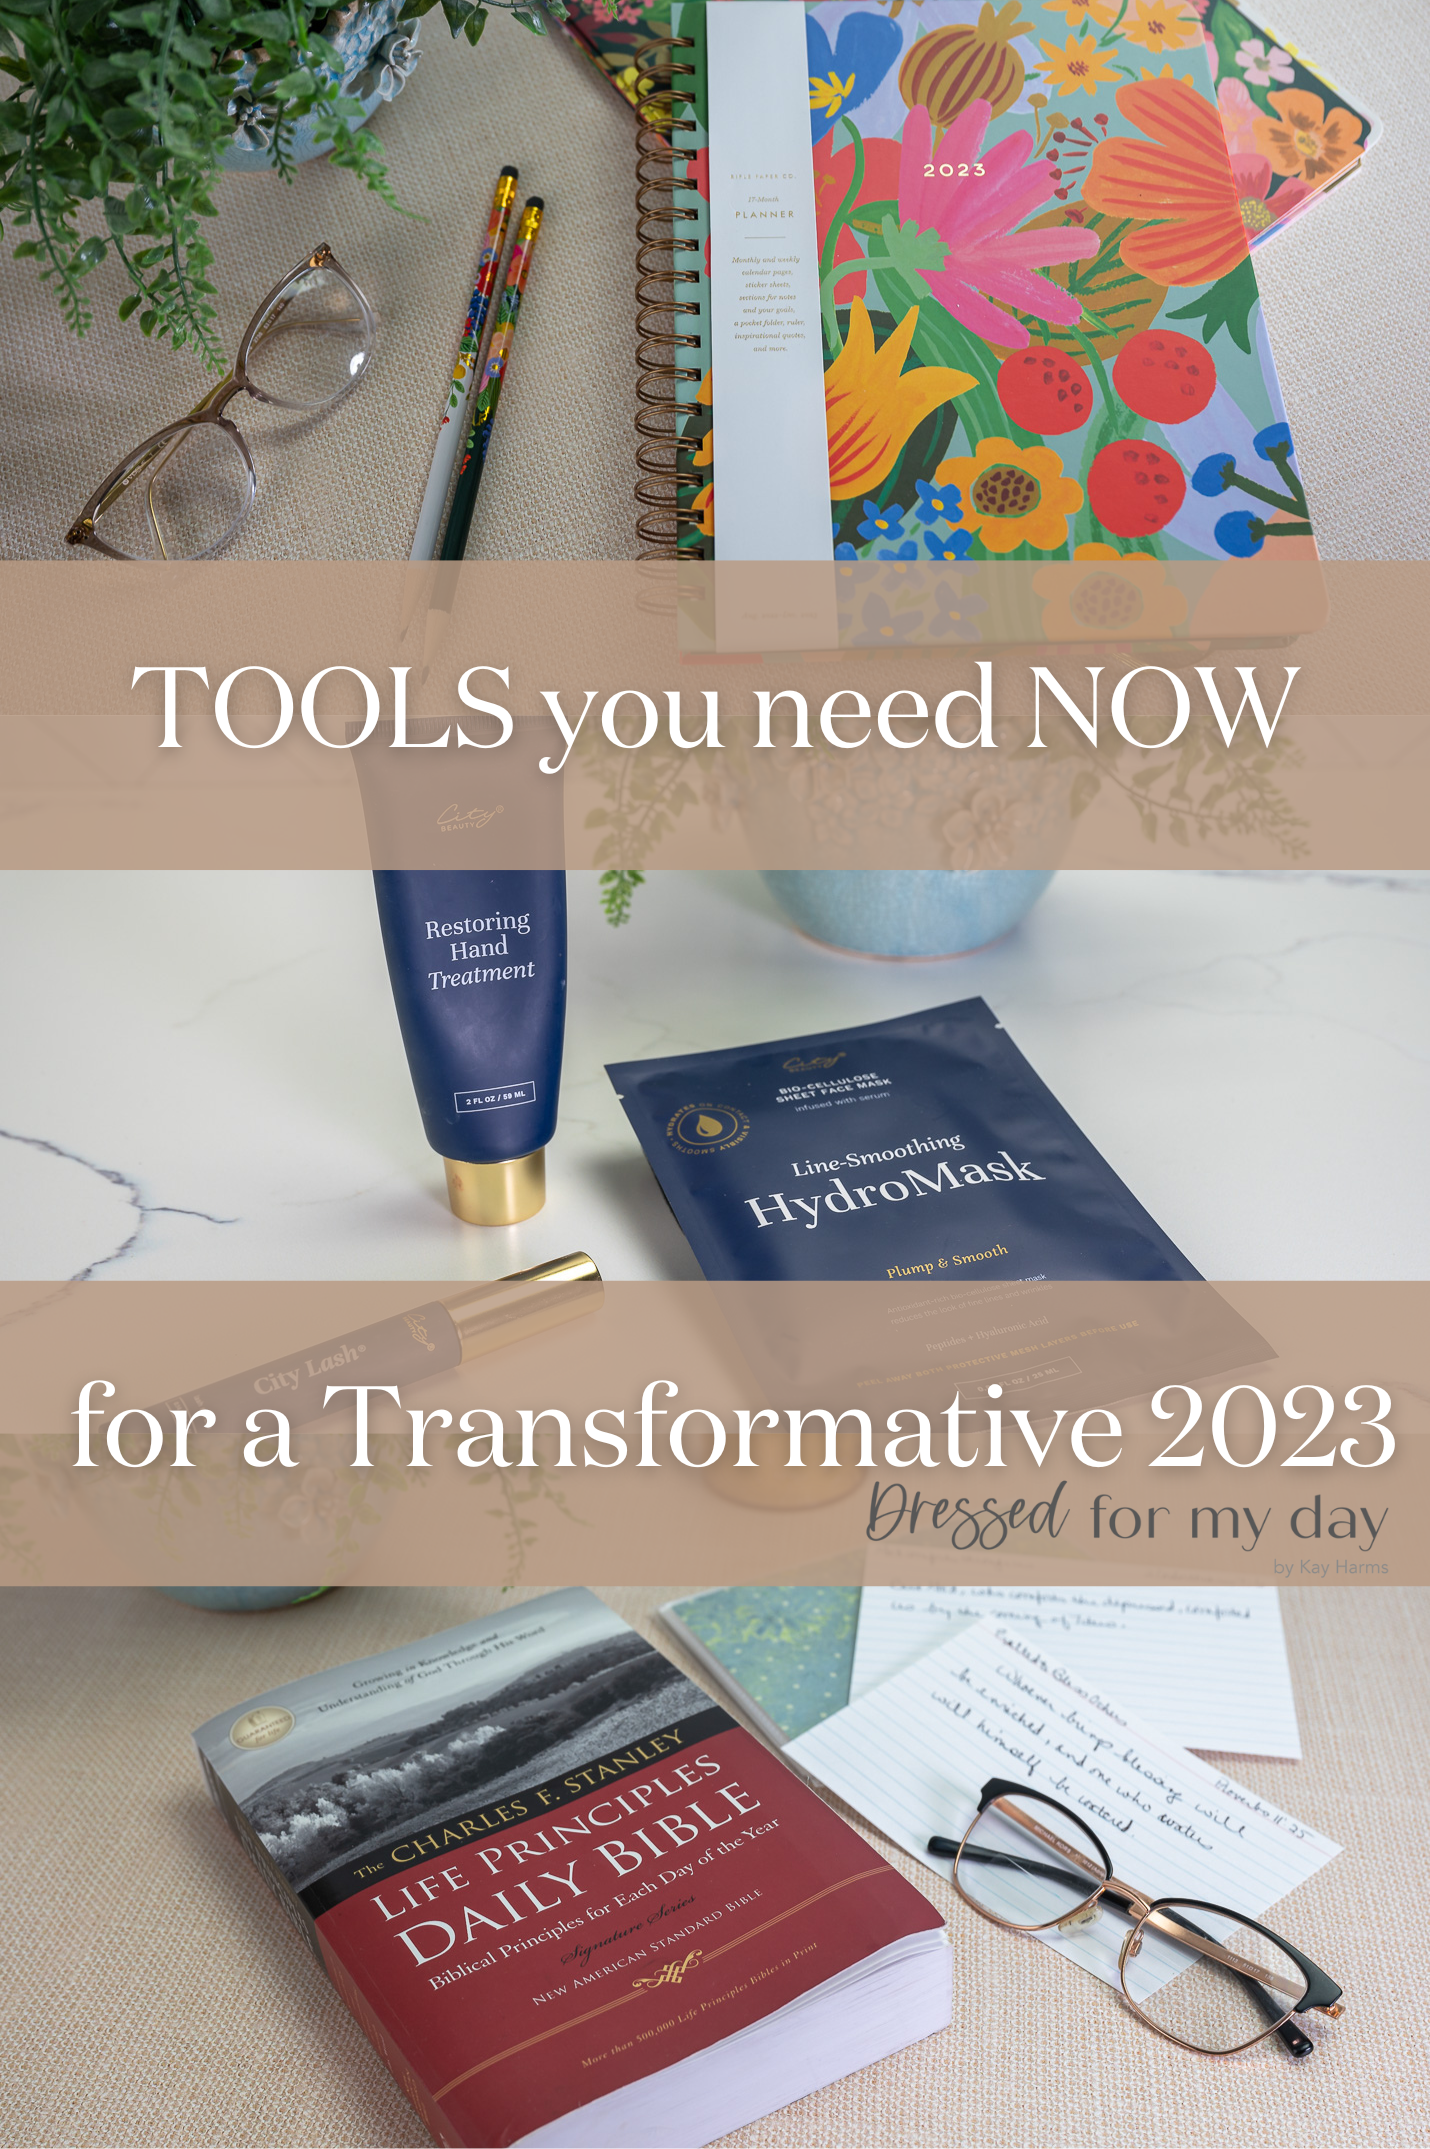 TOOLS you need NOW for a Transformative 2023